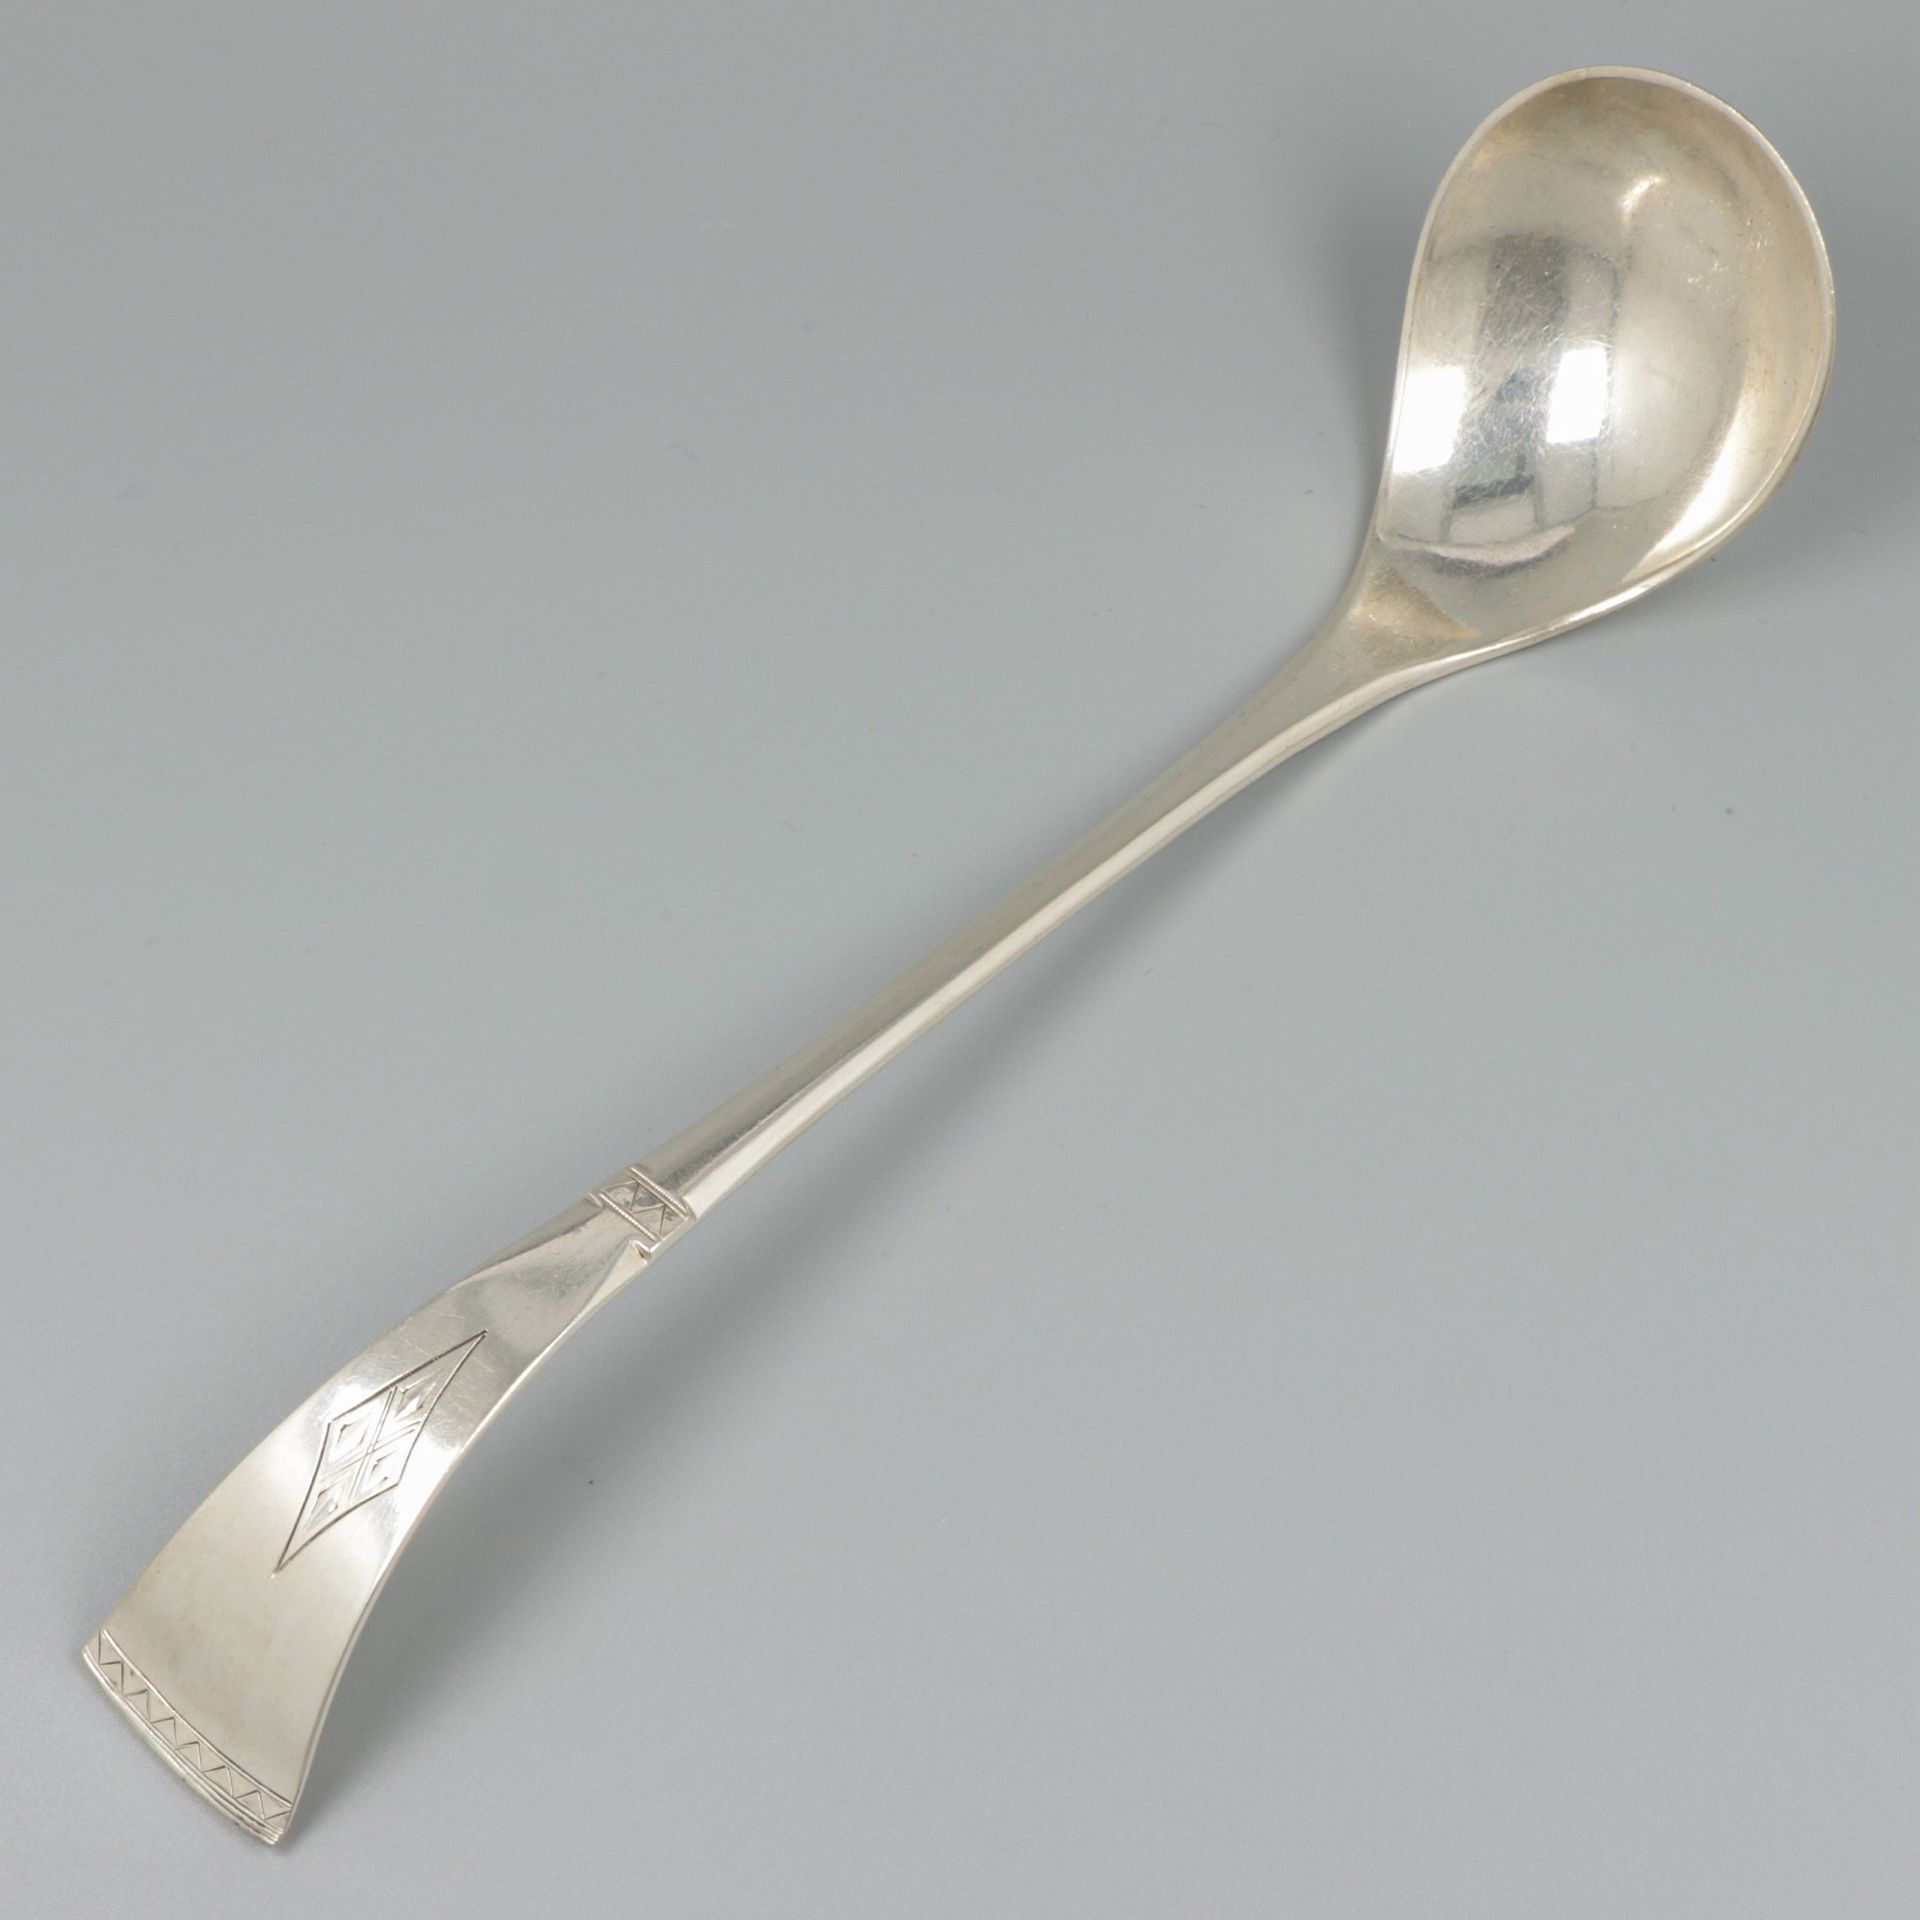 Sauce spoon silver. Sleek model with Empire style decorations. The Netherlands, &hellip;